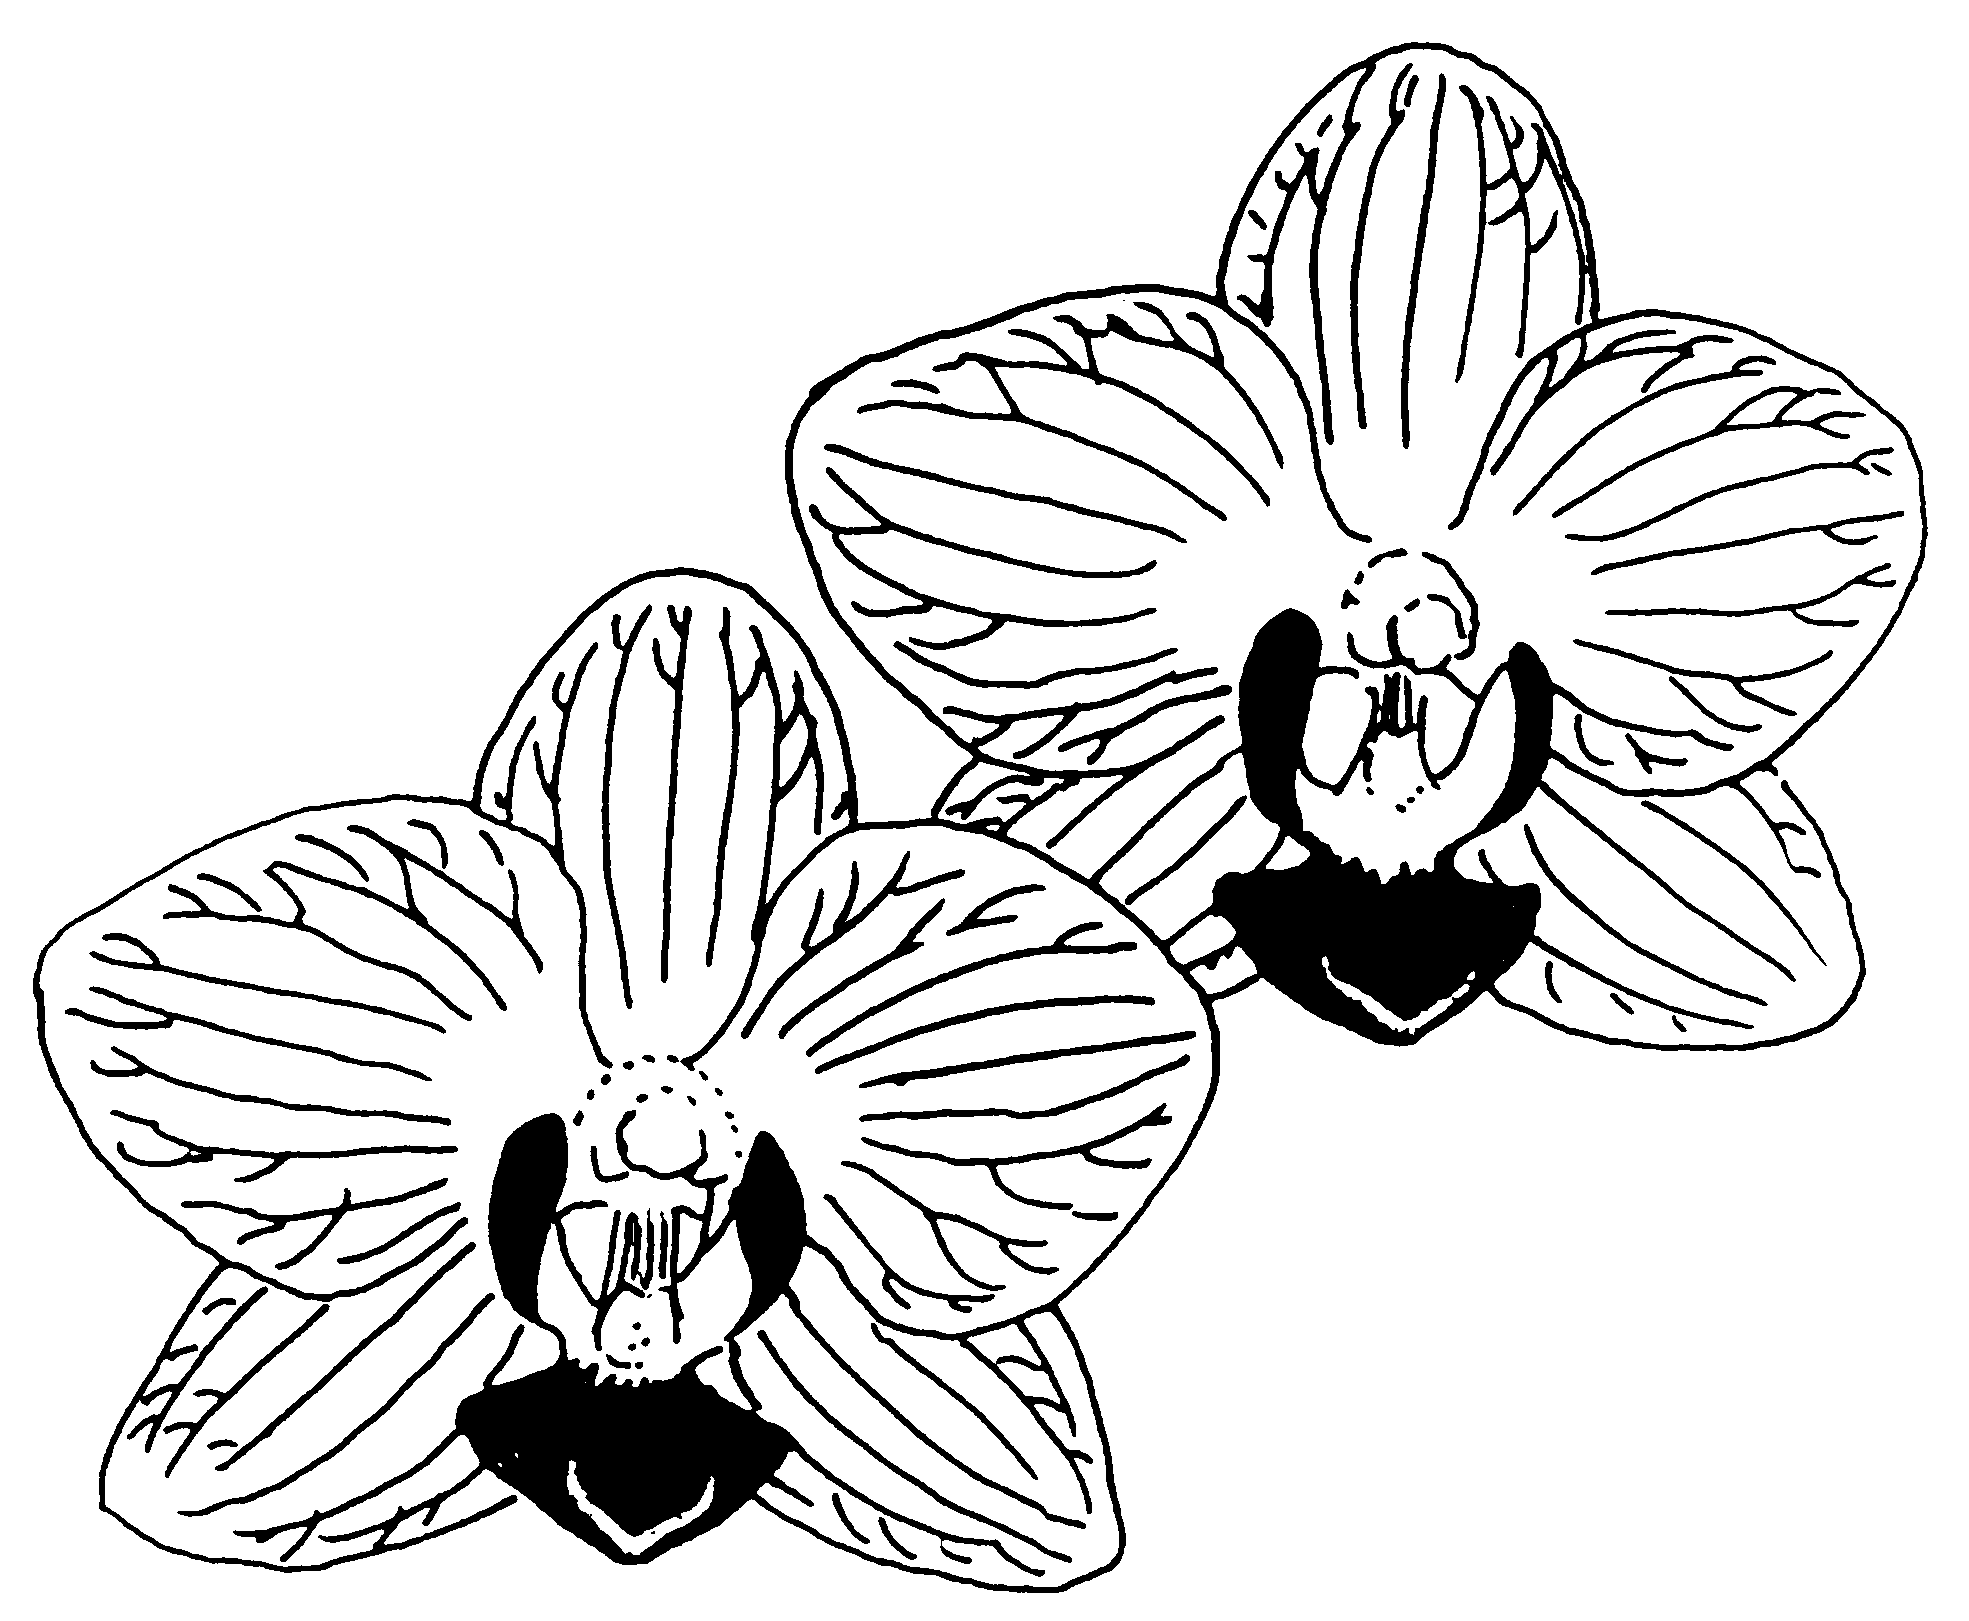 2016 clipart black and white. Gousicteco orchid images